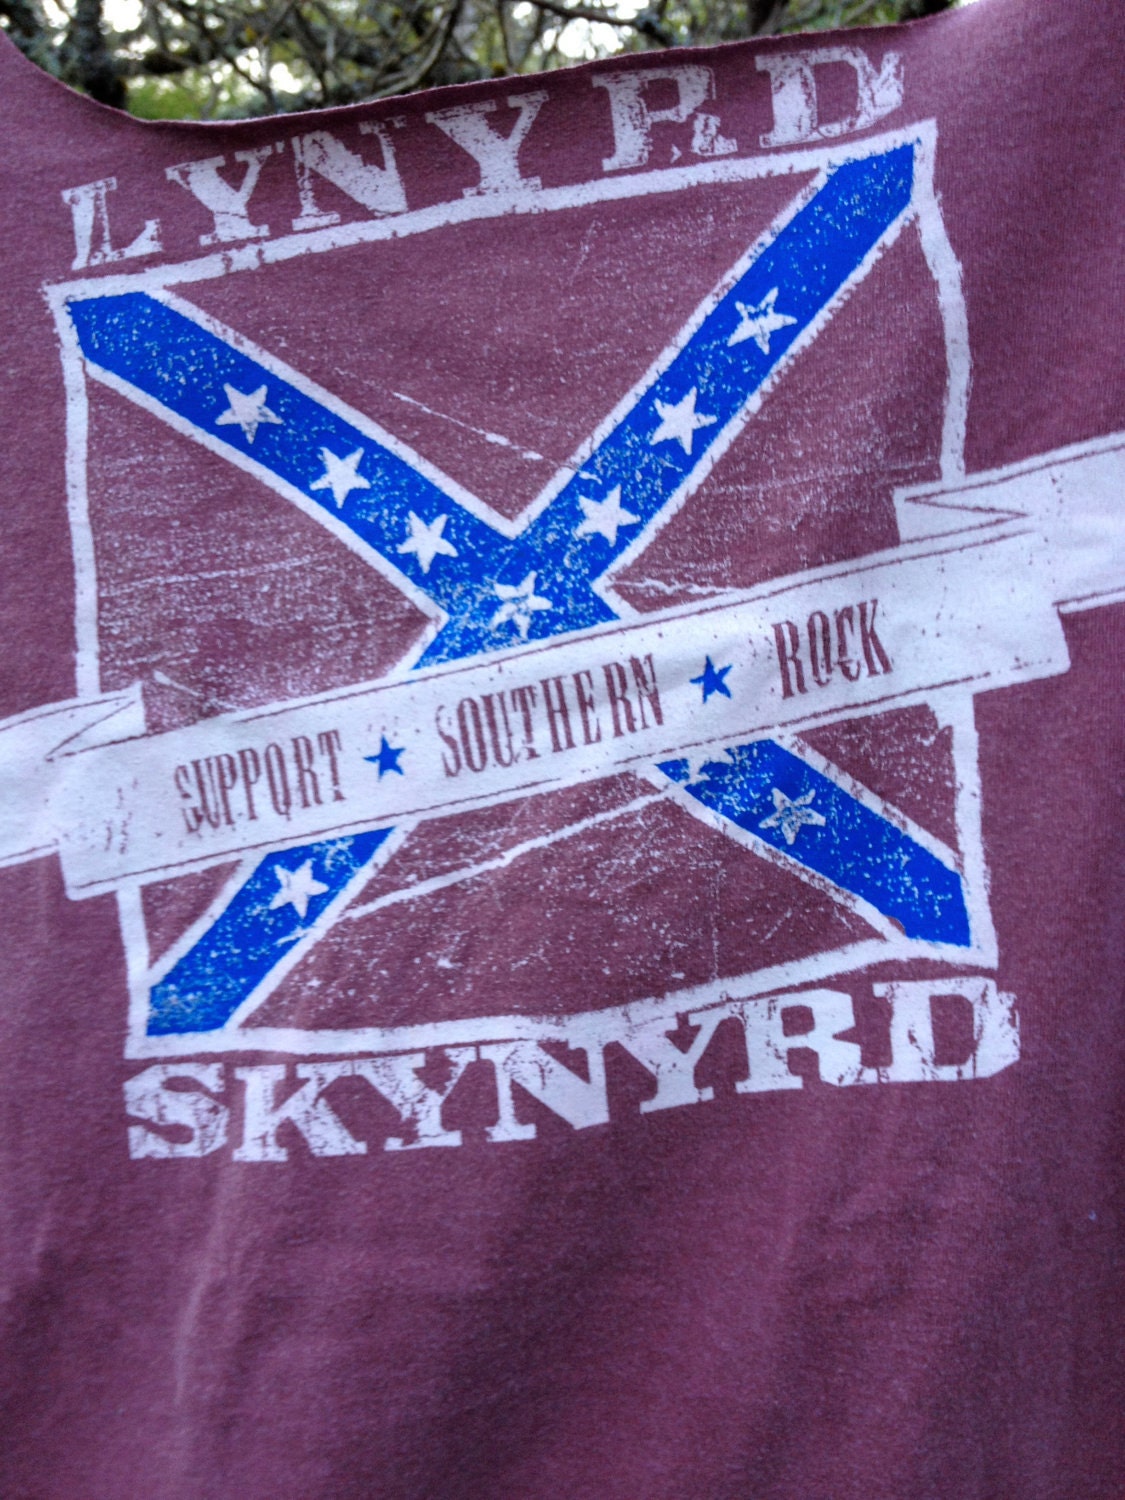 Support Southern Rock